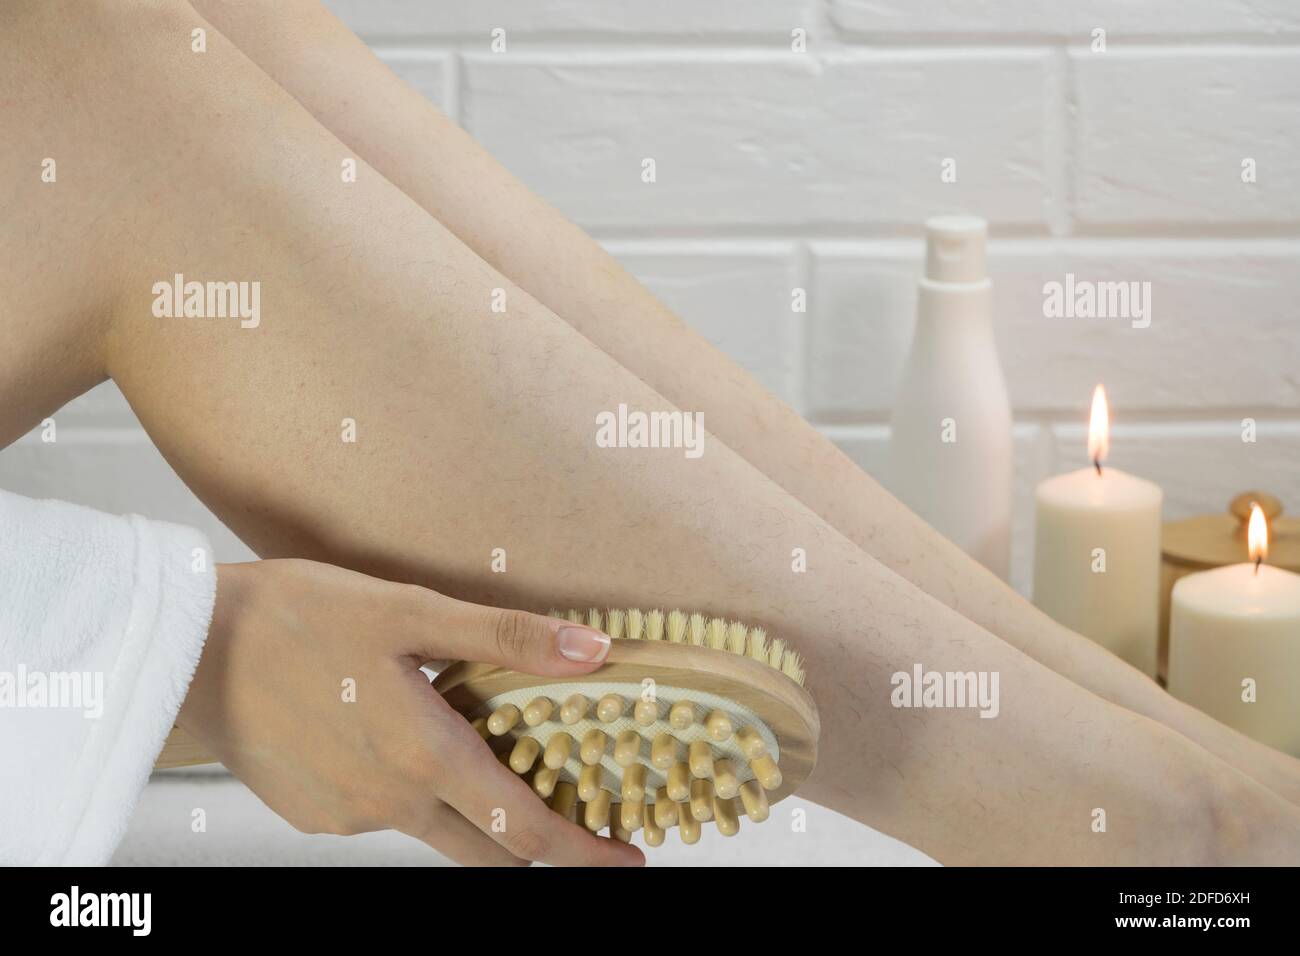 Dry brush massage. Preparing the skin for epilation. Exfoliation with a natural bristle brush. Strawberry legs, keratosis. Home skin and body care. SP Stock Photo